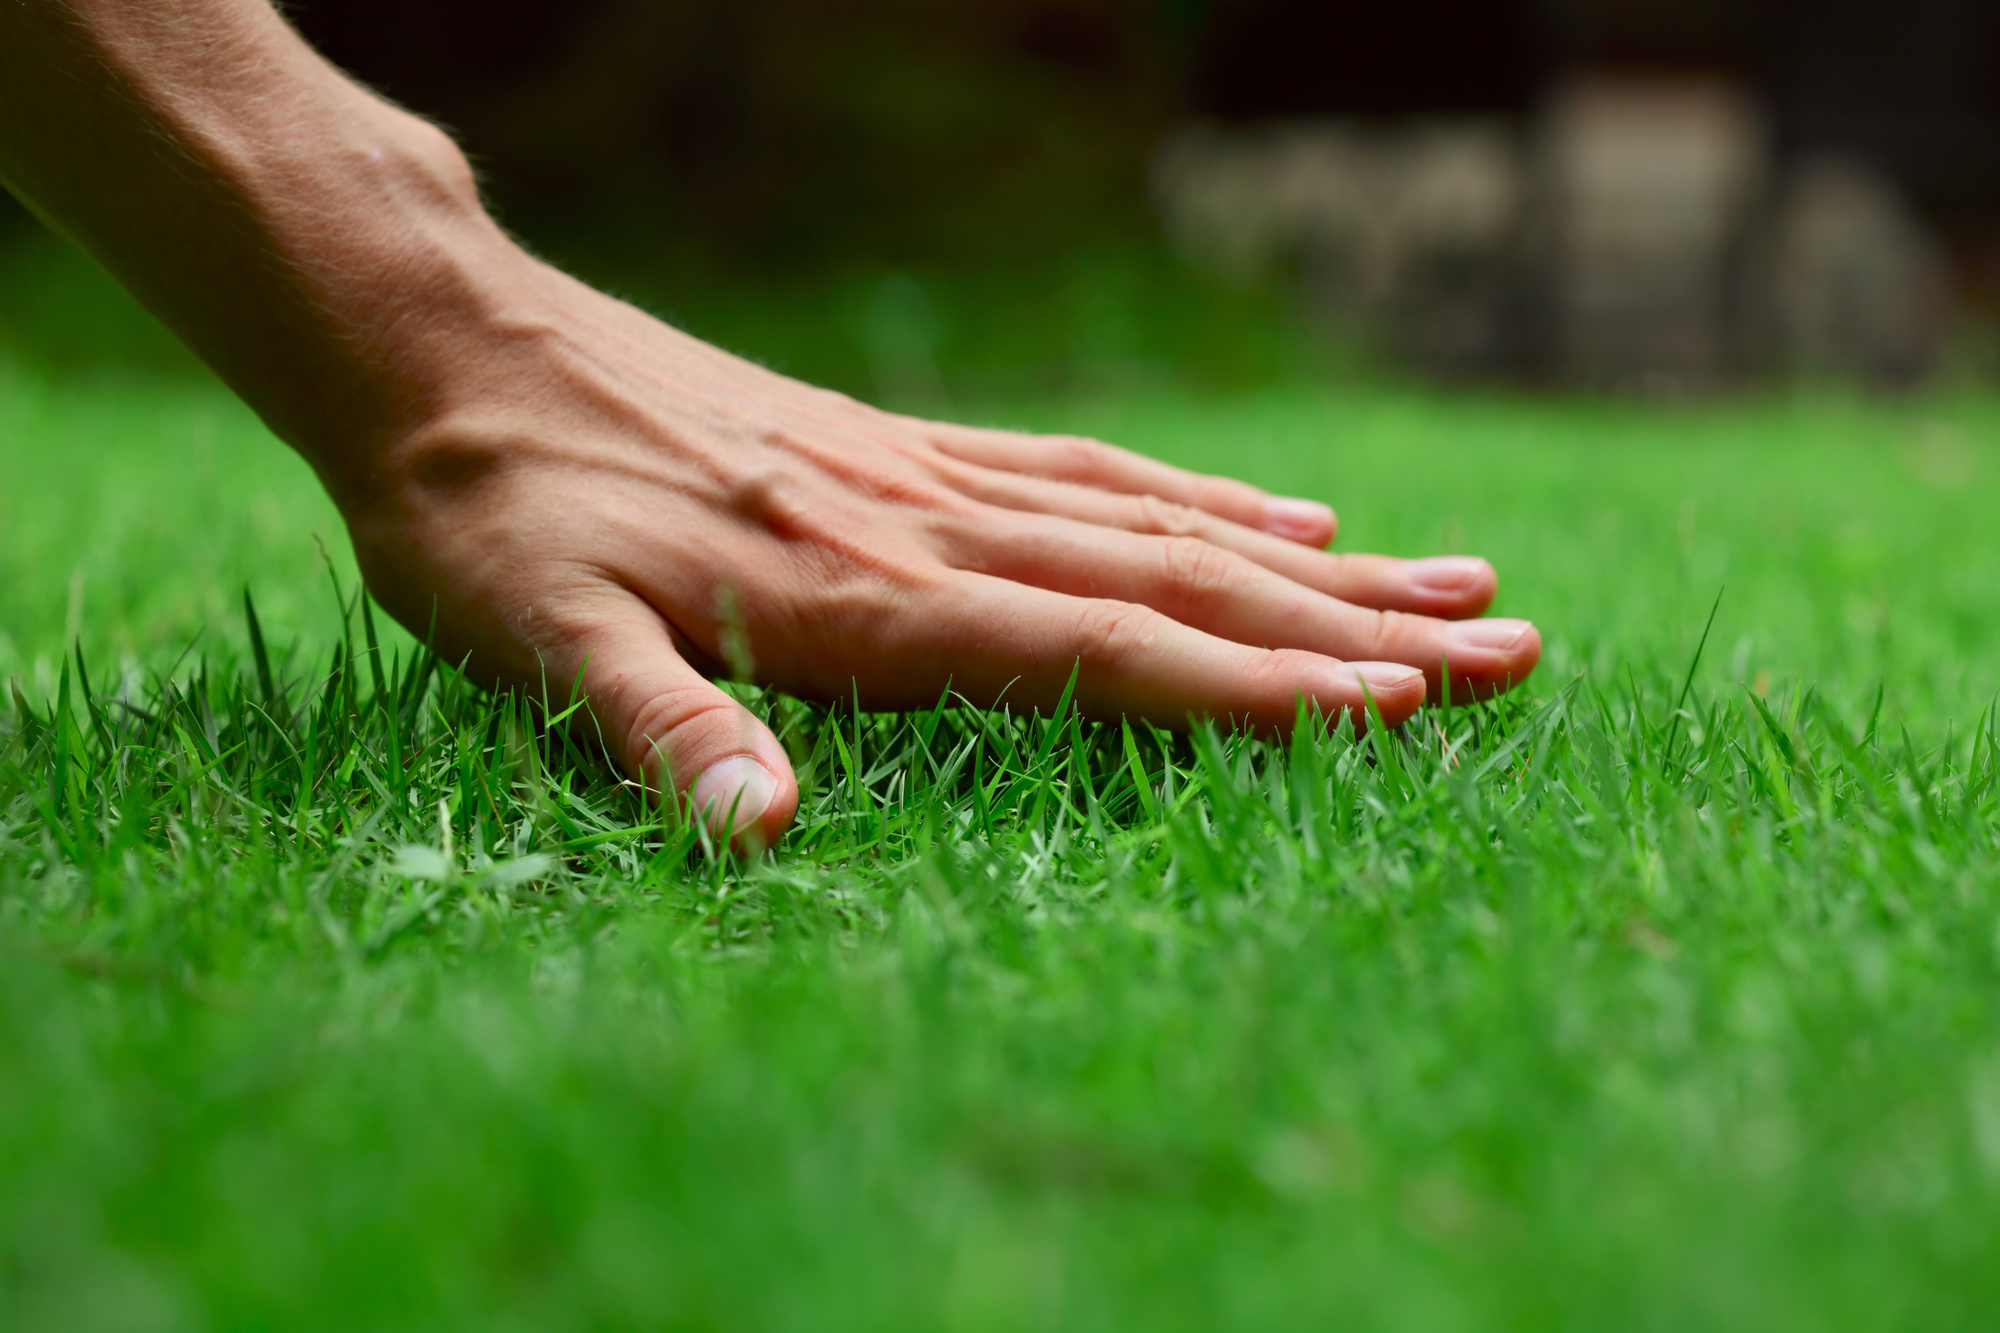 Is the grass greener on the other side of the fence? Here are four great lawn care tips to help make your garden look healthy.